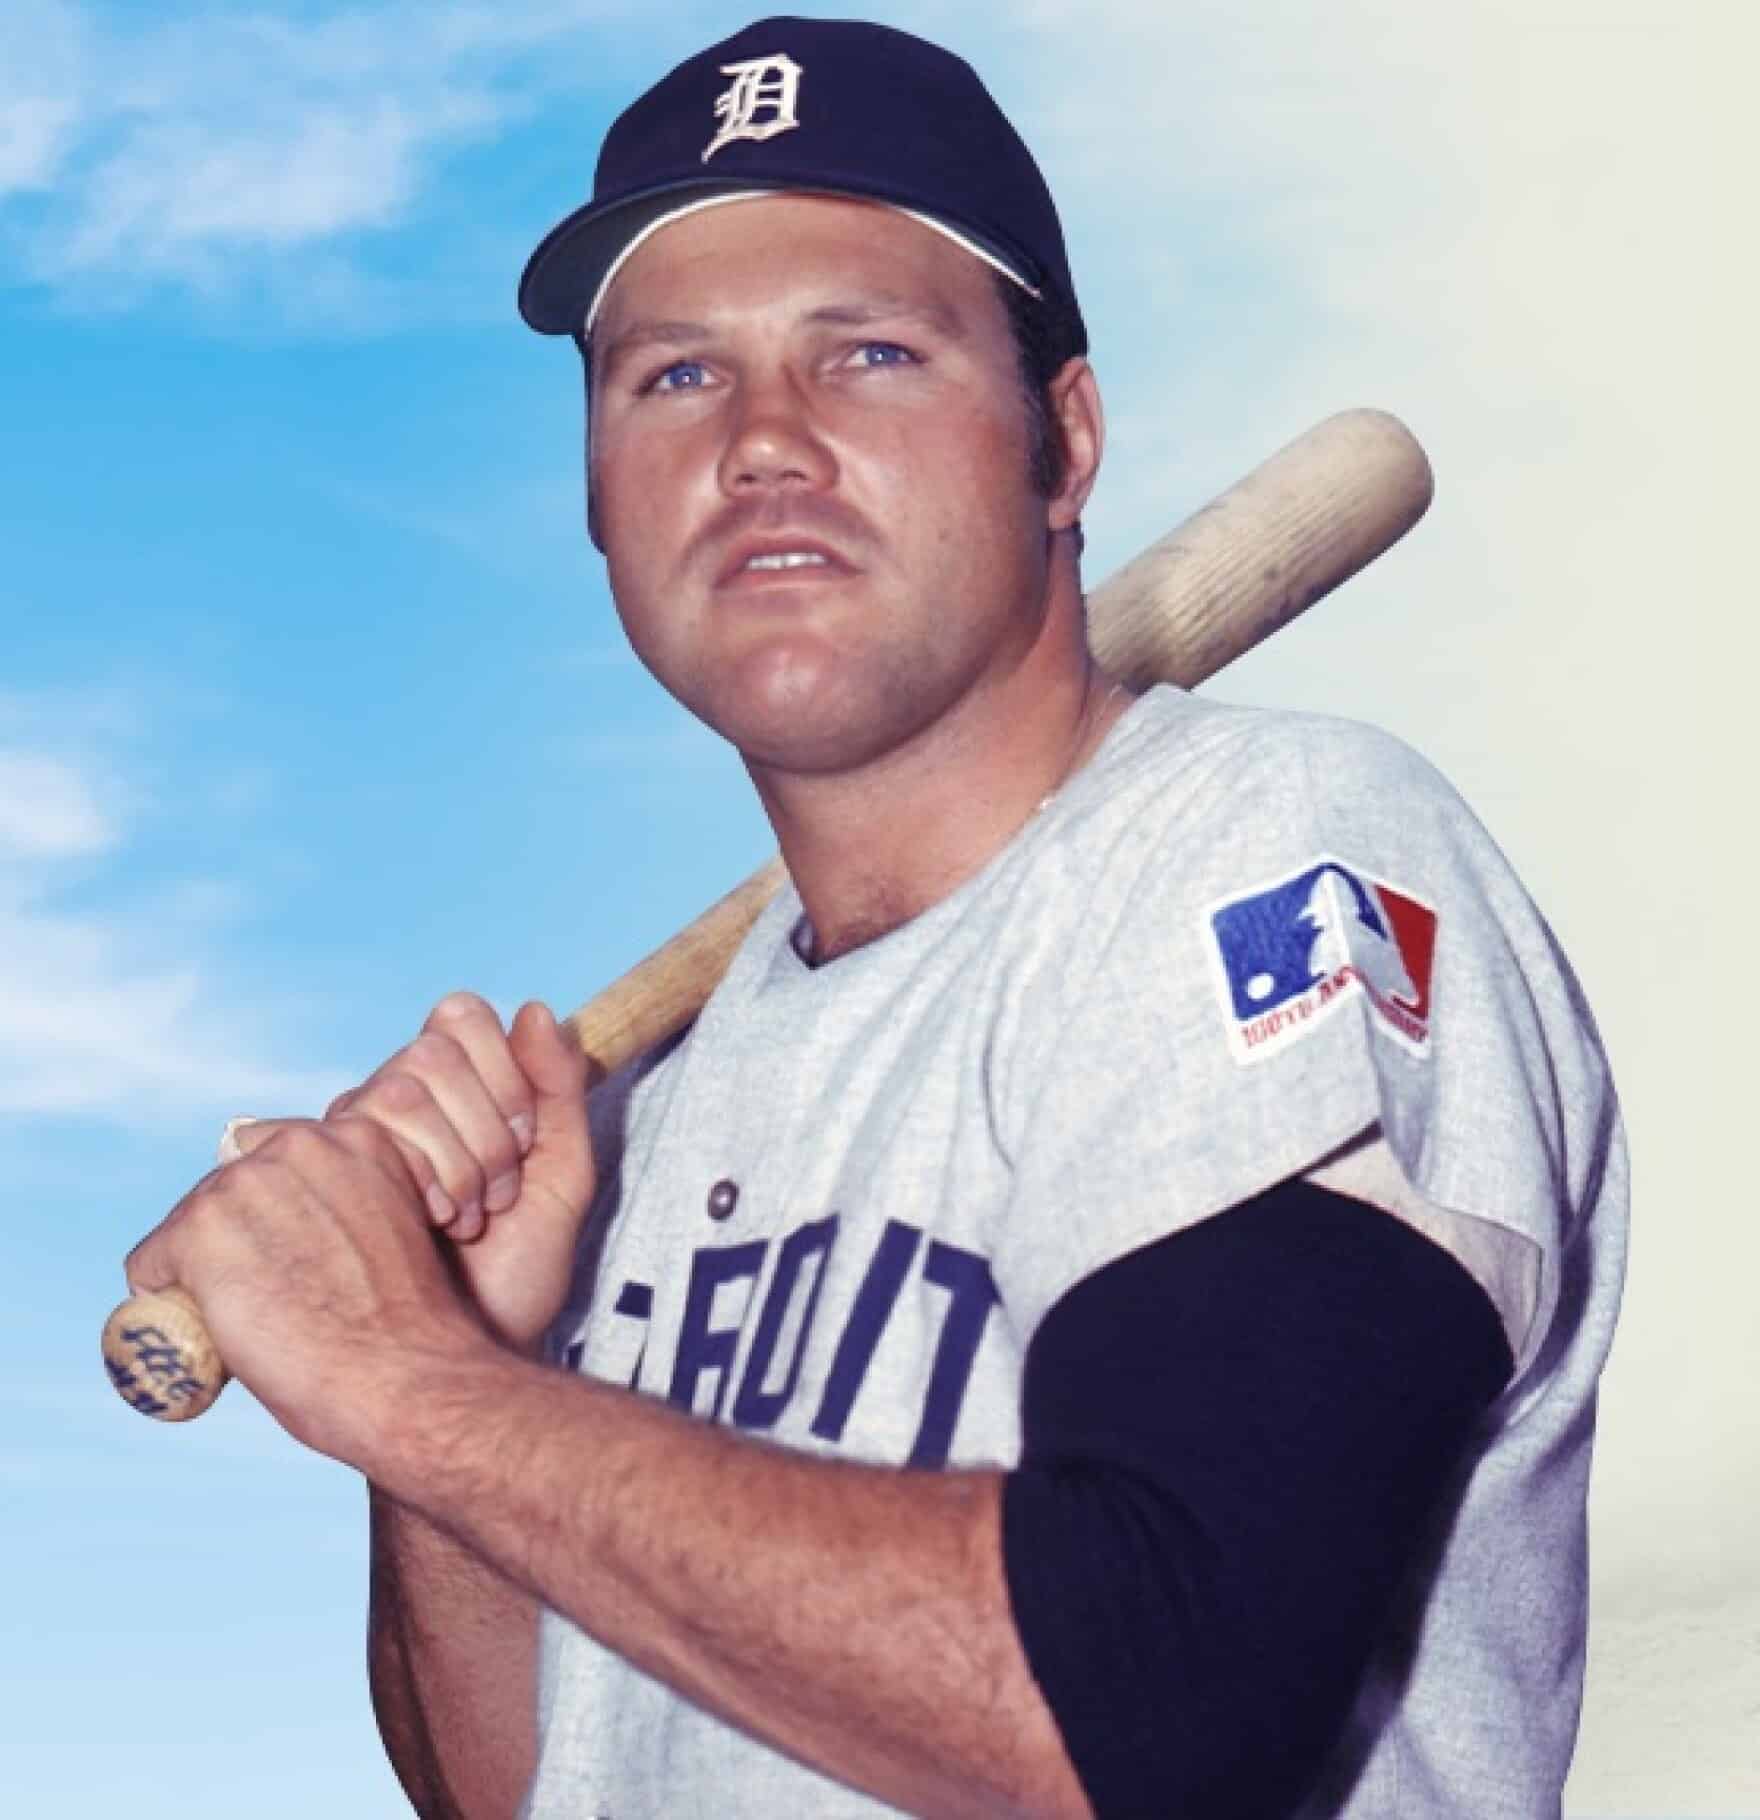 One of the best Detroit Tigers catchers of all time, Bill Freehan